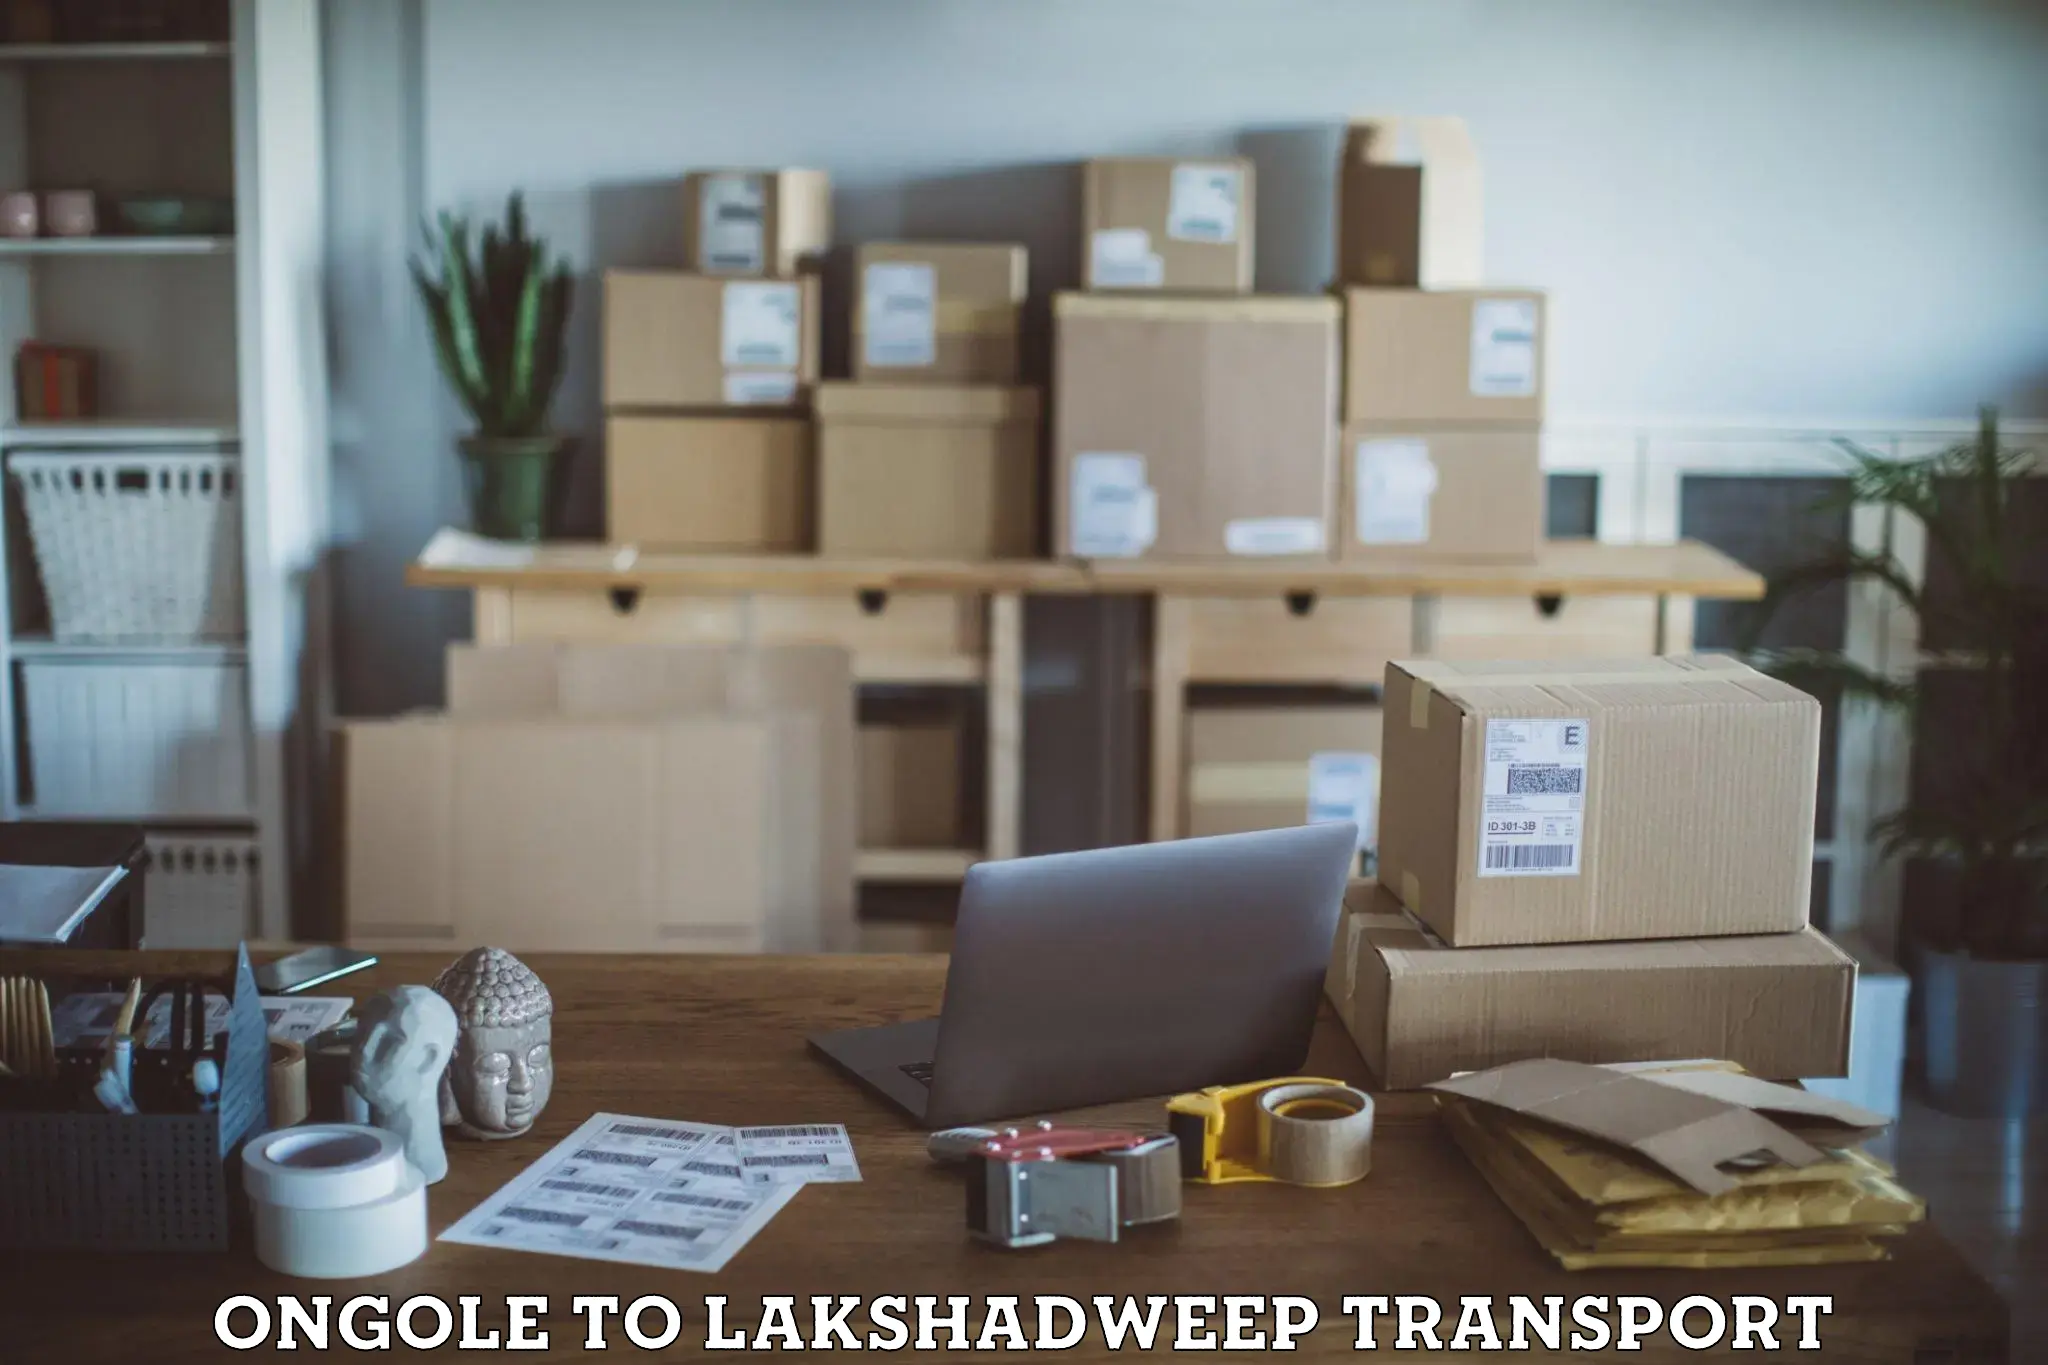 Road transport services in Ongole to Lakshadweep